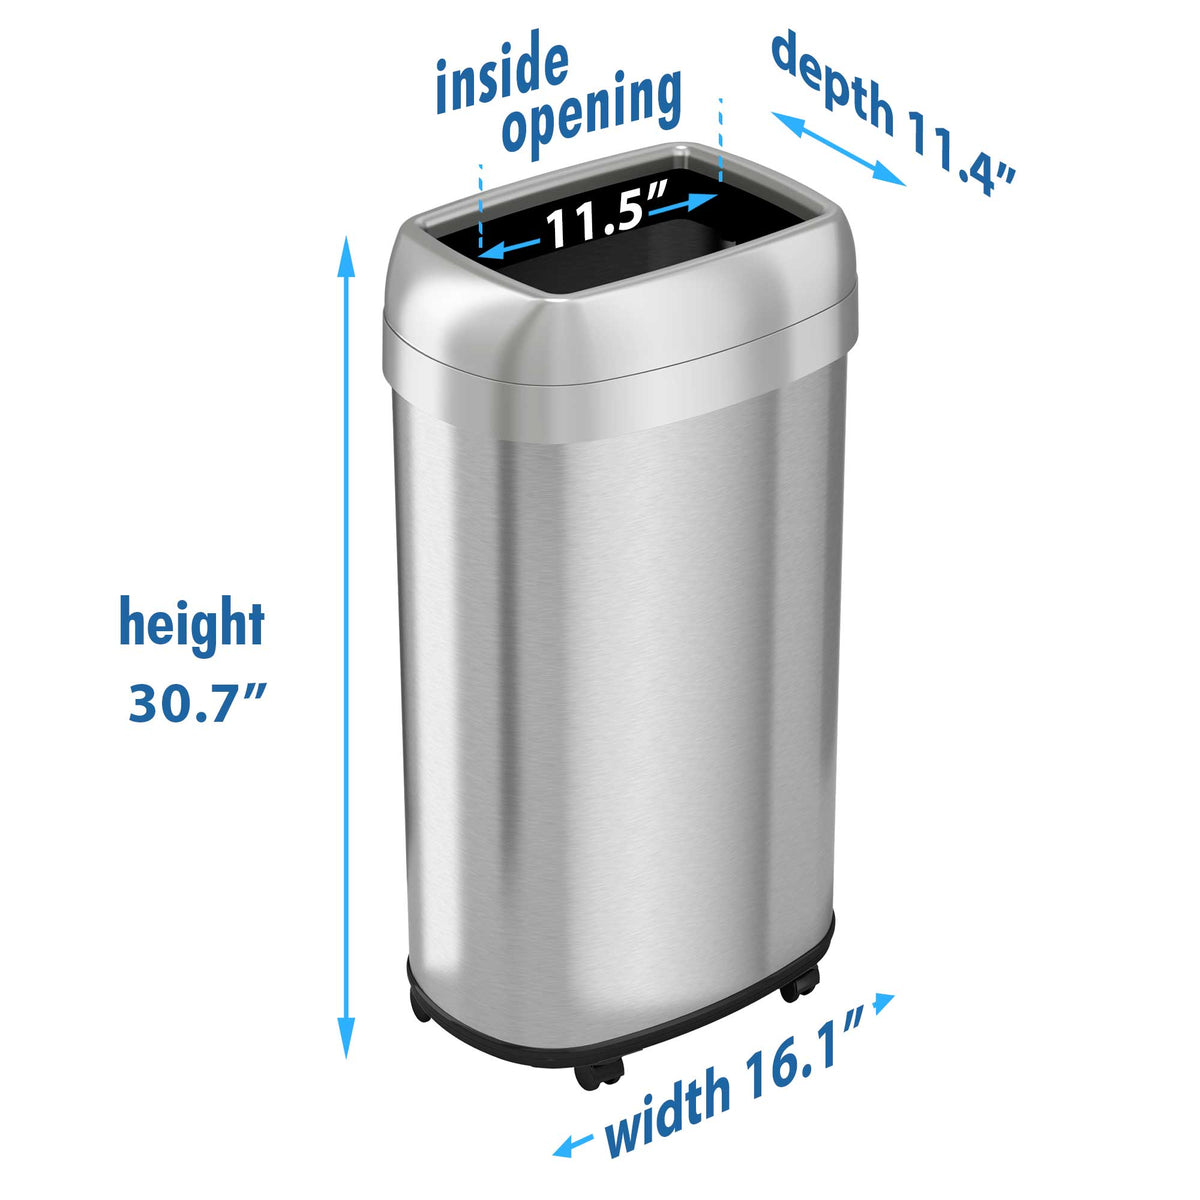 16 Gallon / 60 Liter Elliptical Open Top Trash Can with Wheels dimensions